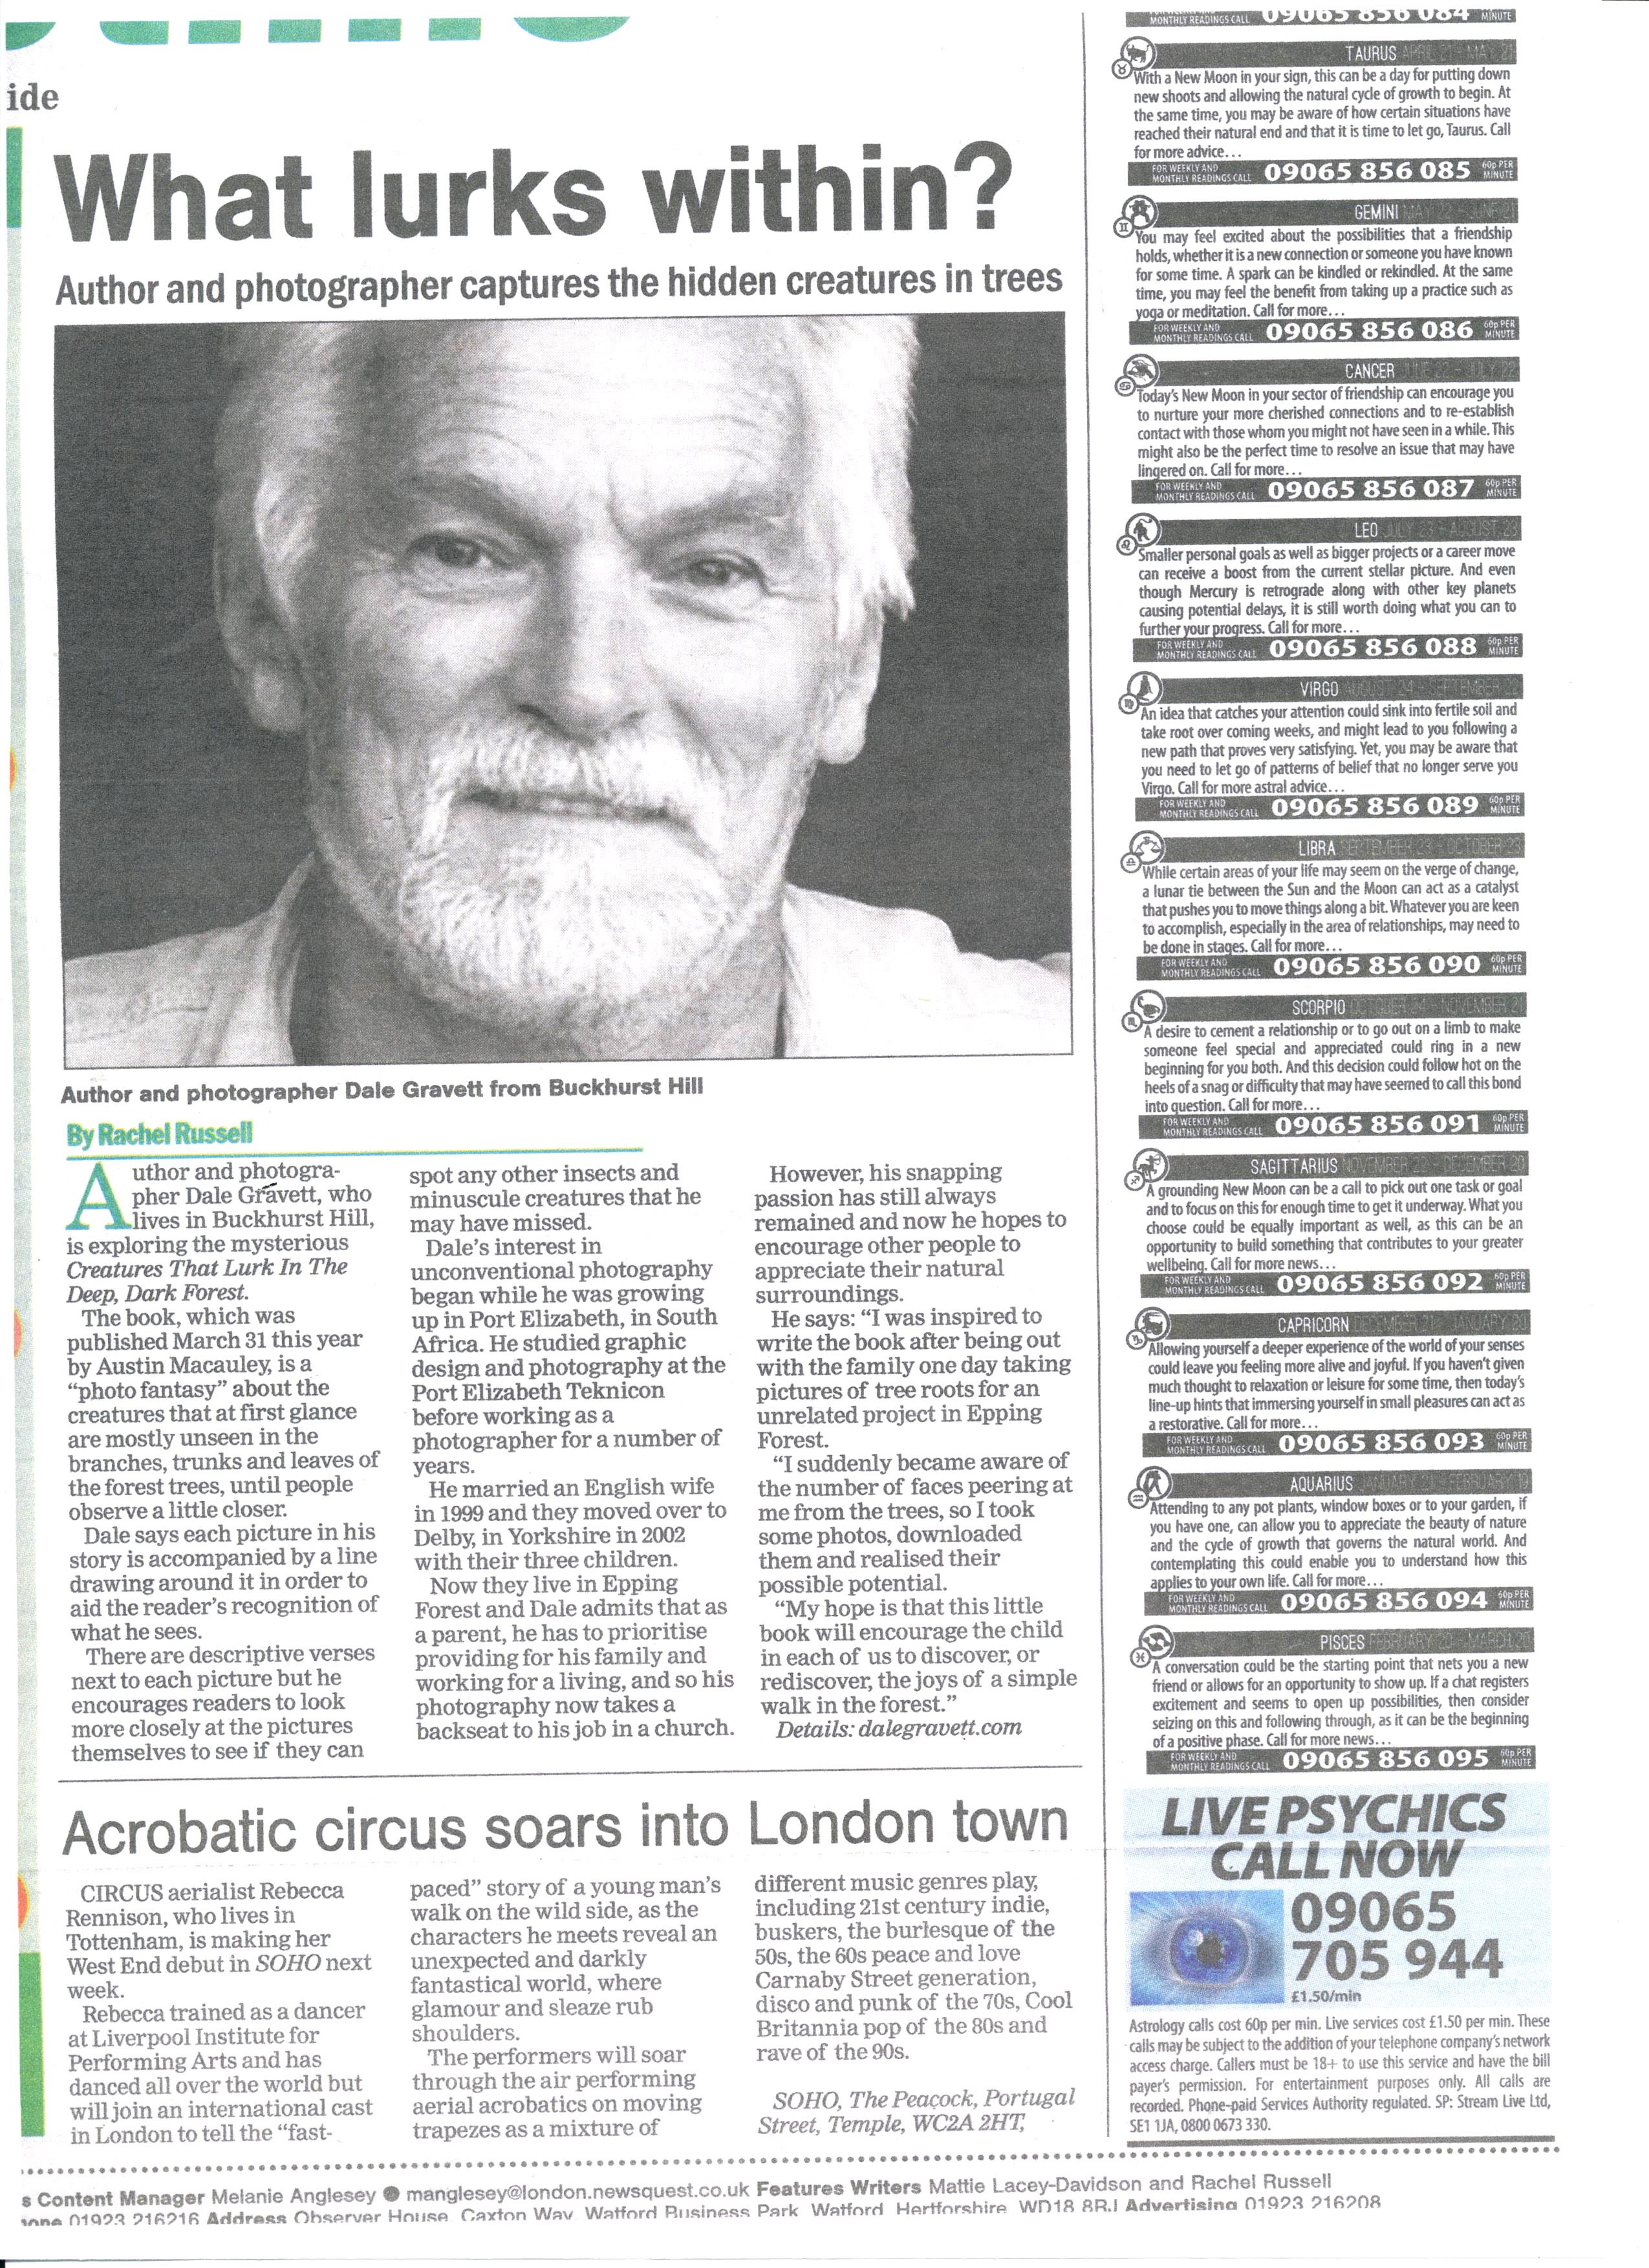 Dale Gravett and His New Release Poetry Book Feature in the Epping Forest Guardian